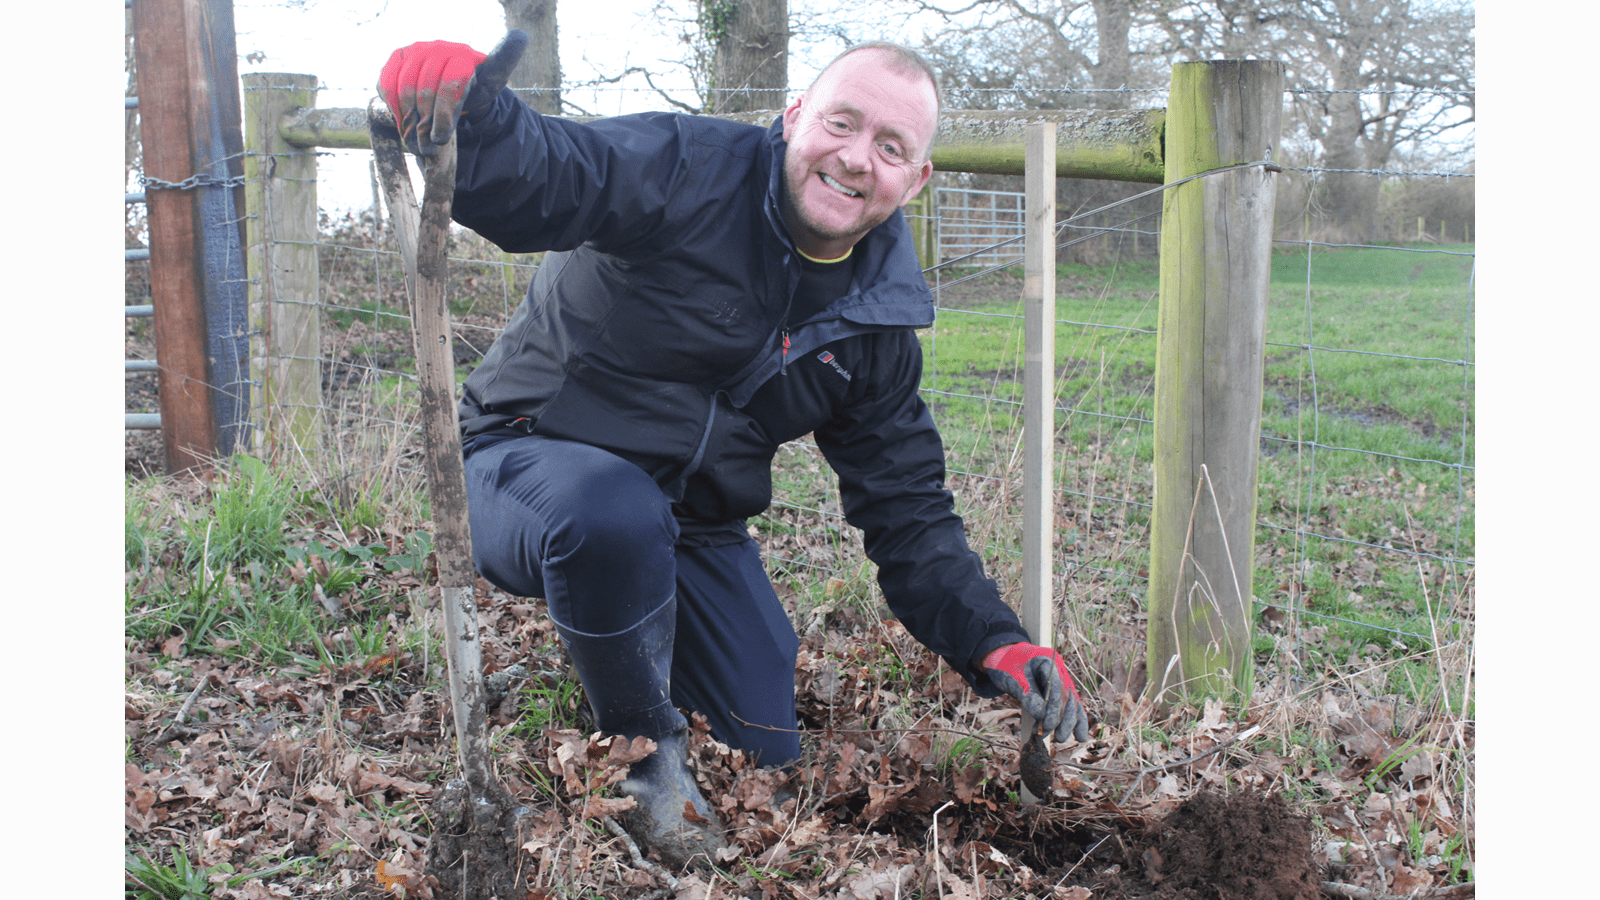 Kieran Dowling plants a tree as part of a reforestation project supported by CSL Seqirus